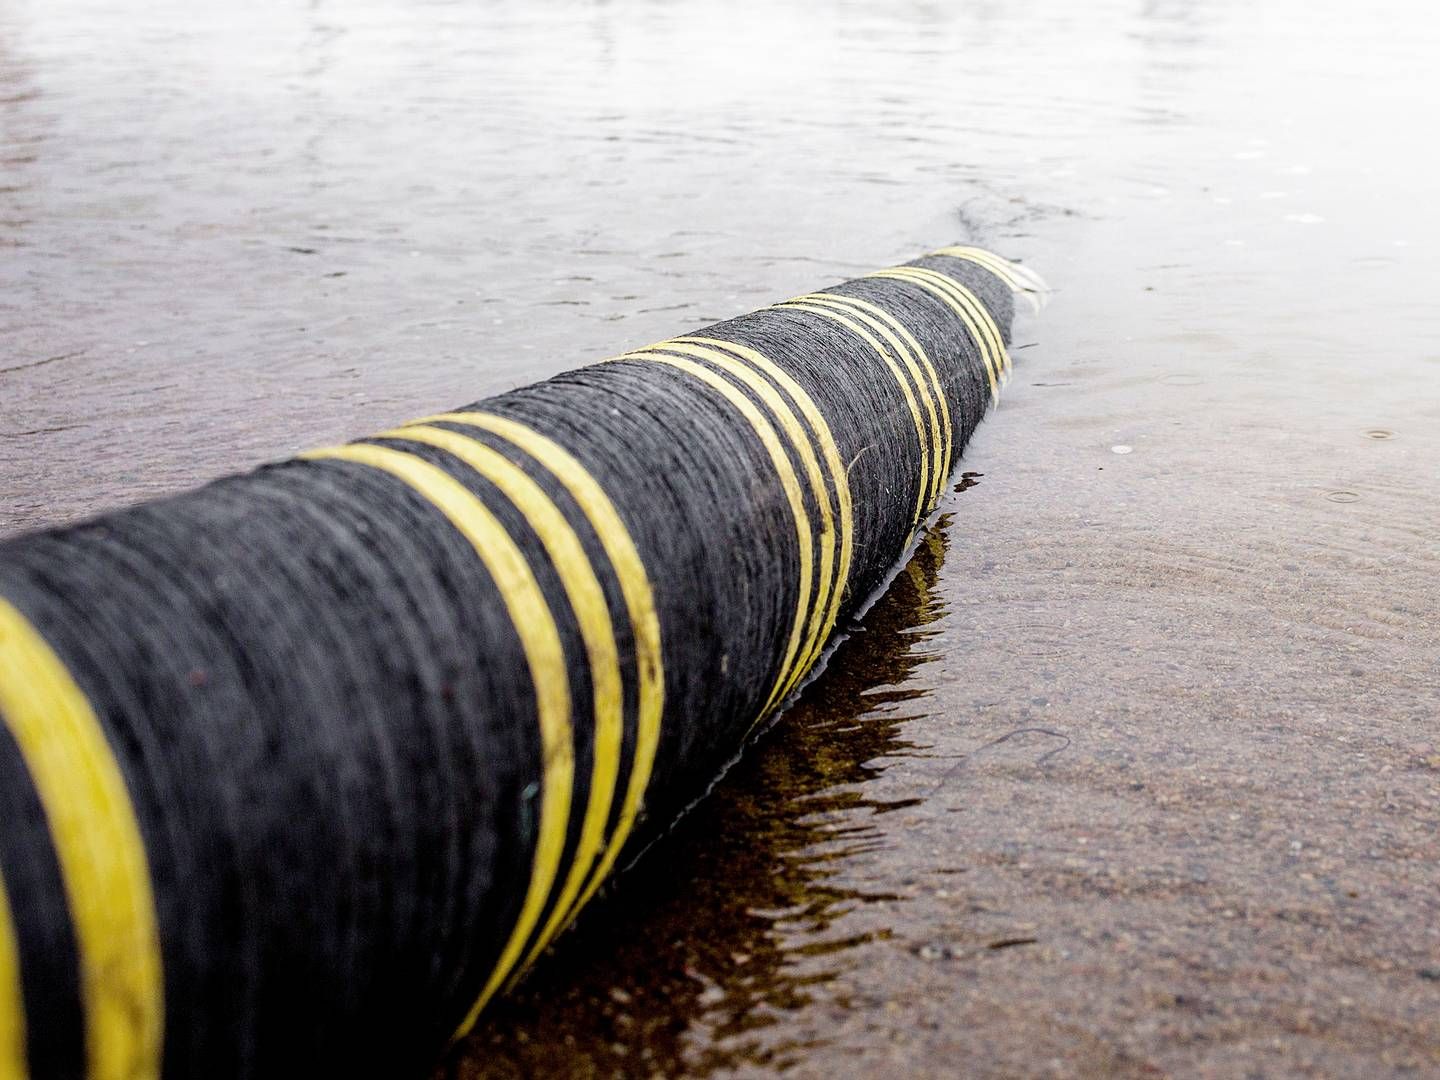 NKT expects to land a large order regarding high-voltage cables for offshore wind turbines in Poland. The picture shows cables in the waters near Karlskrona, Sweden. | Foto: Nkt